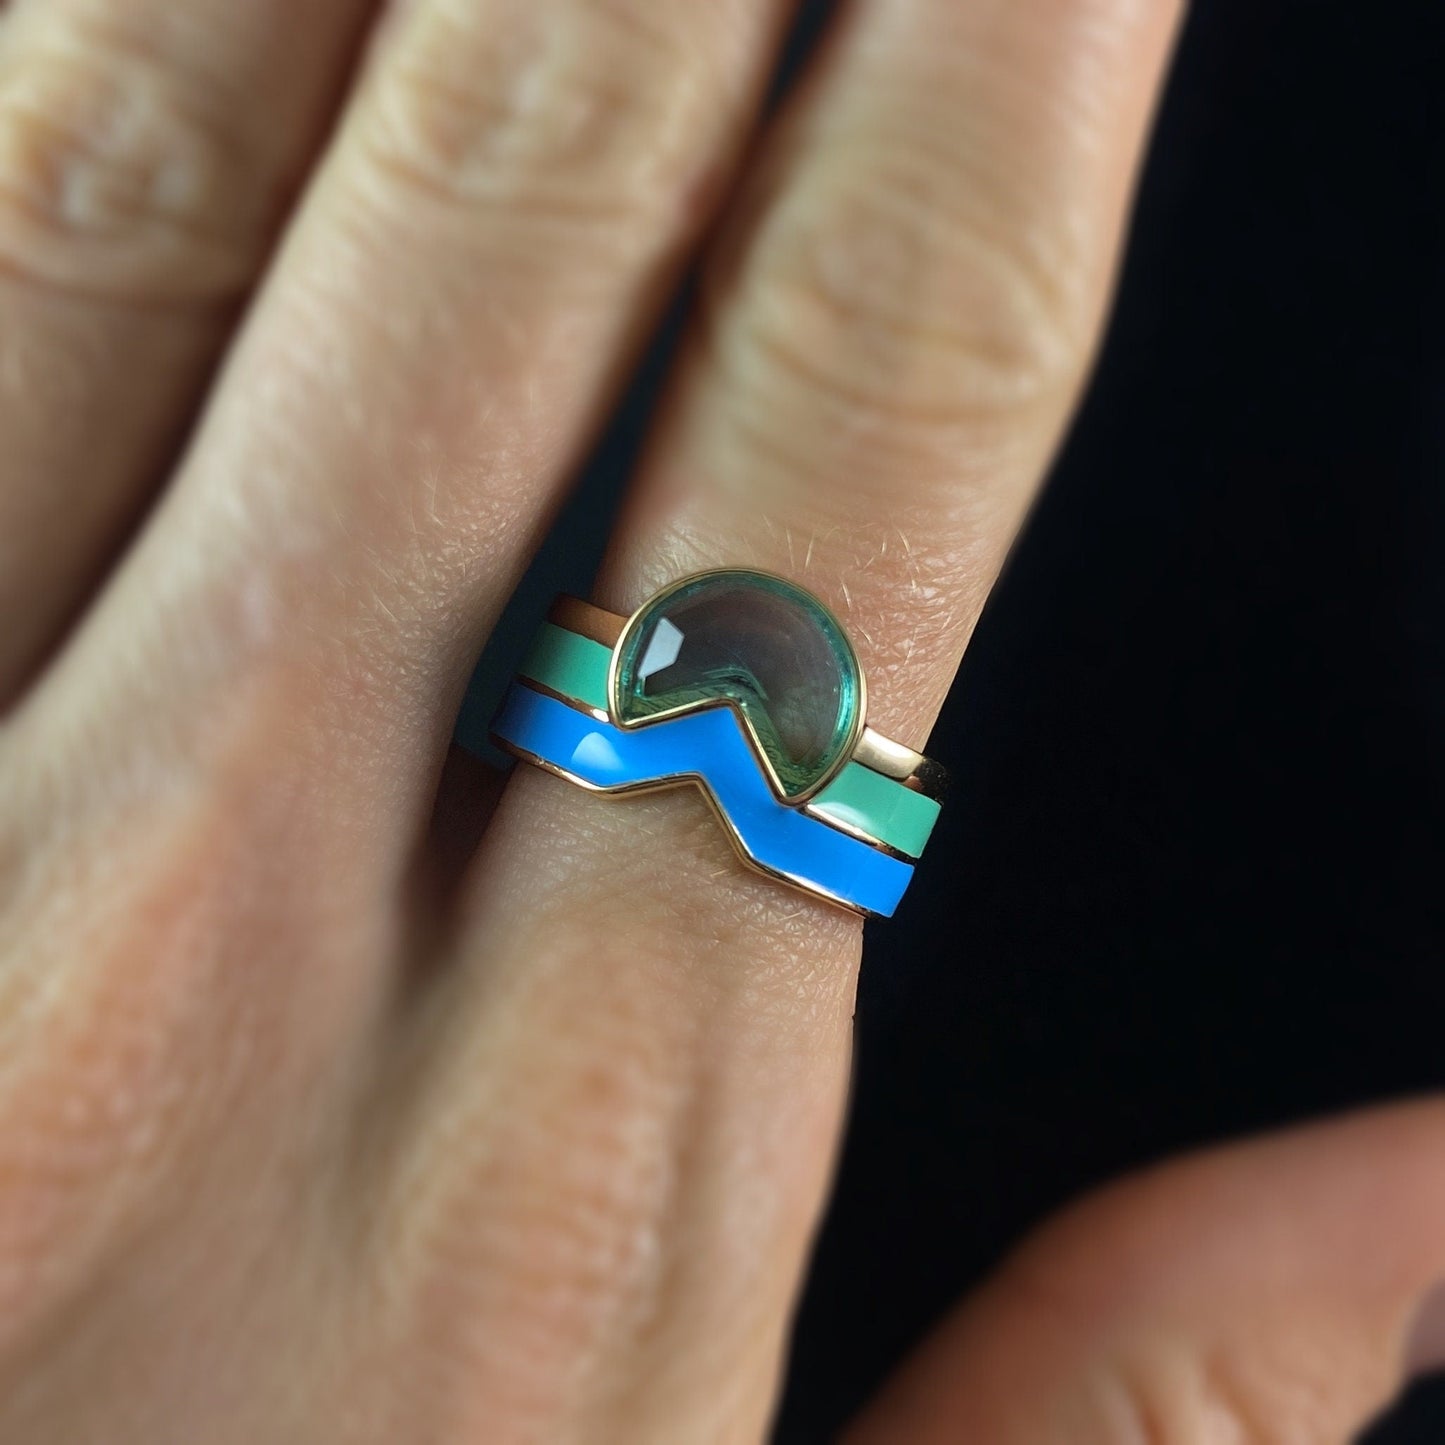 1920s Art Deco Style Gold Ring with Blue/Green Enamel Band Accents and Quartz Stone, Size 7 - Tequila Sunrise Sky